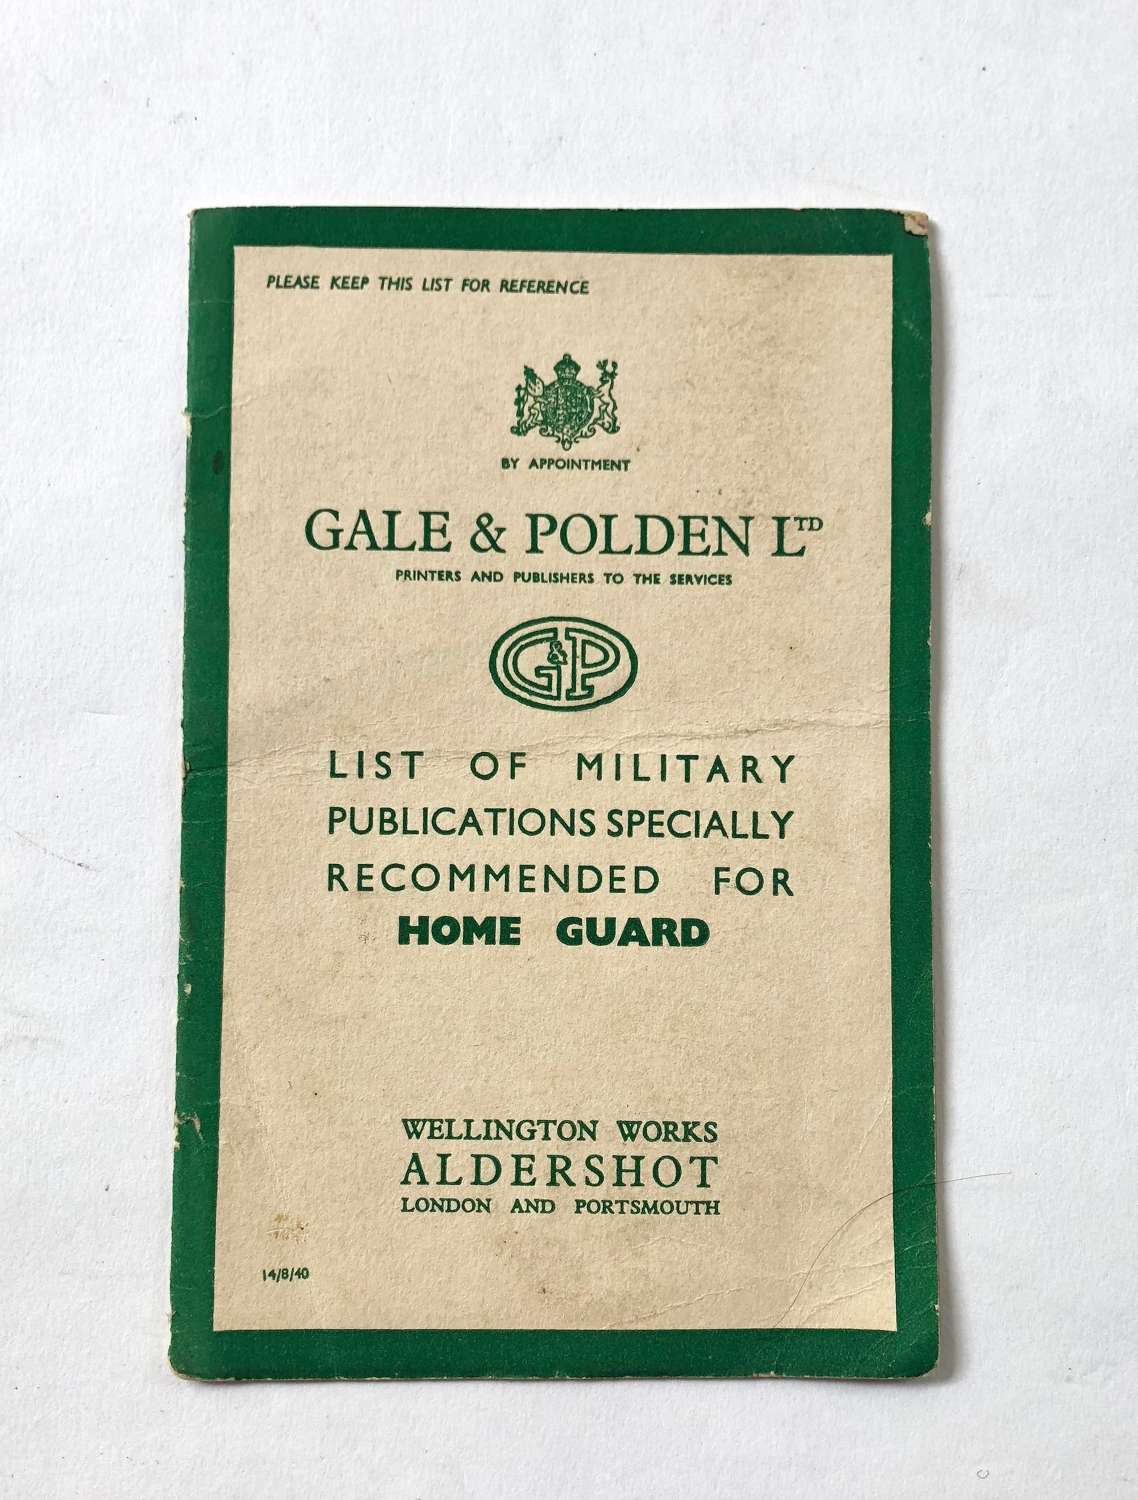 1940 Home Front Home Guard List of Publications Gale & Polden Ltd